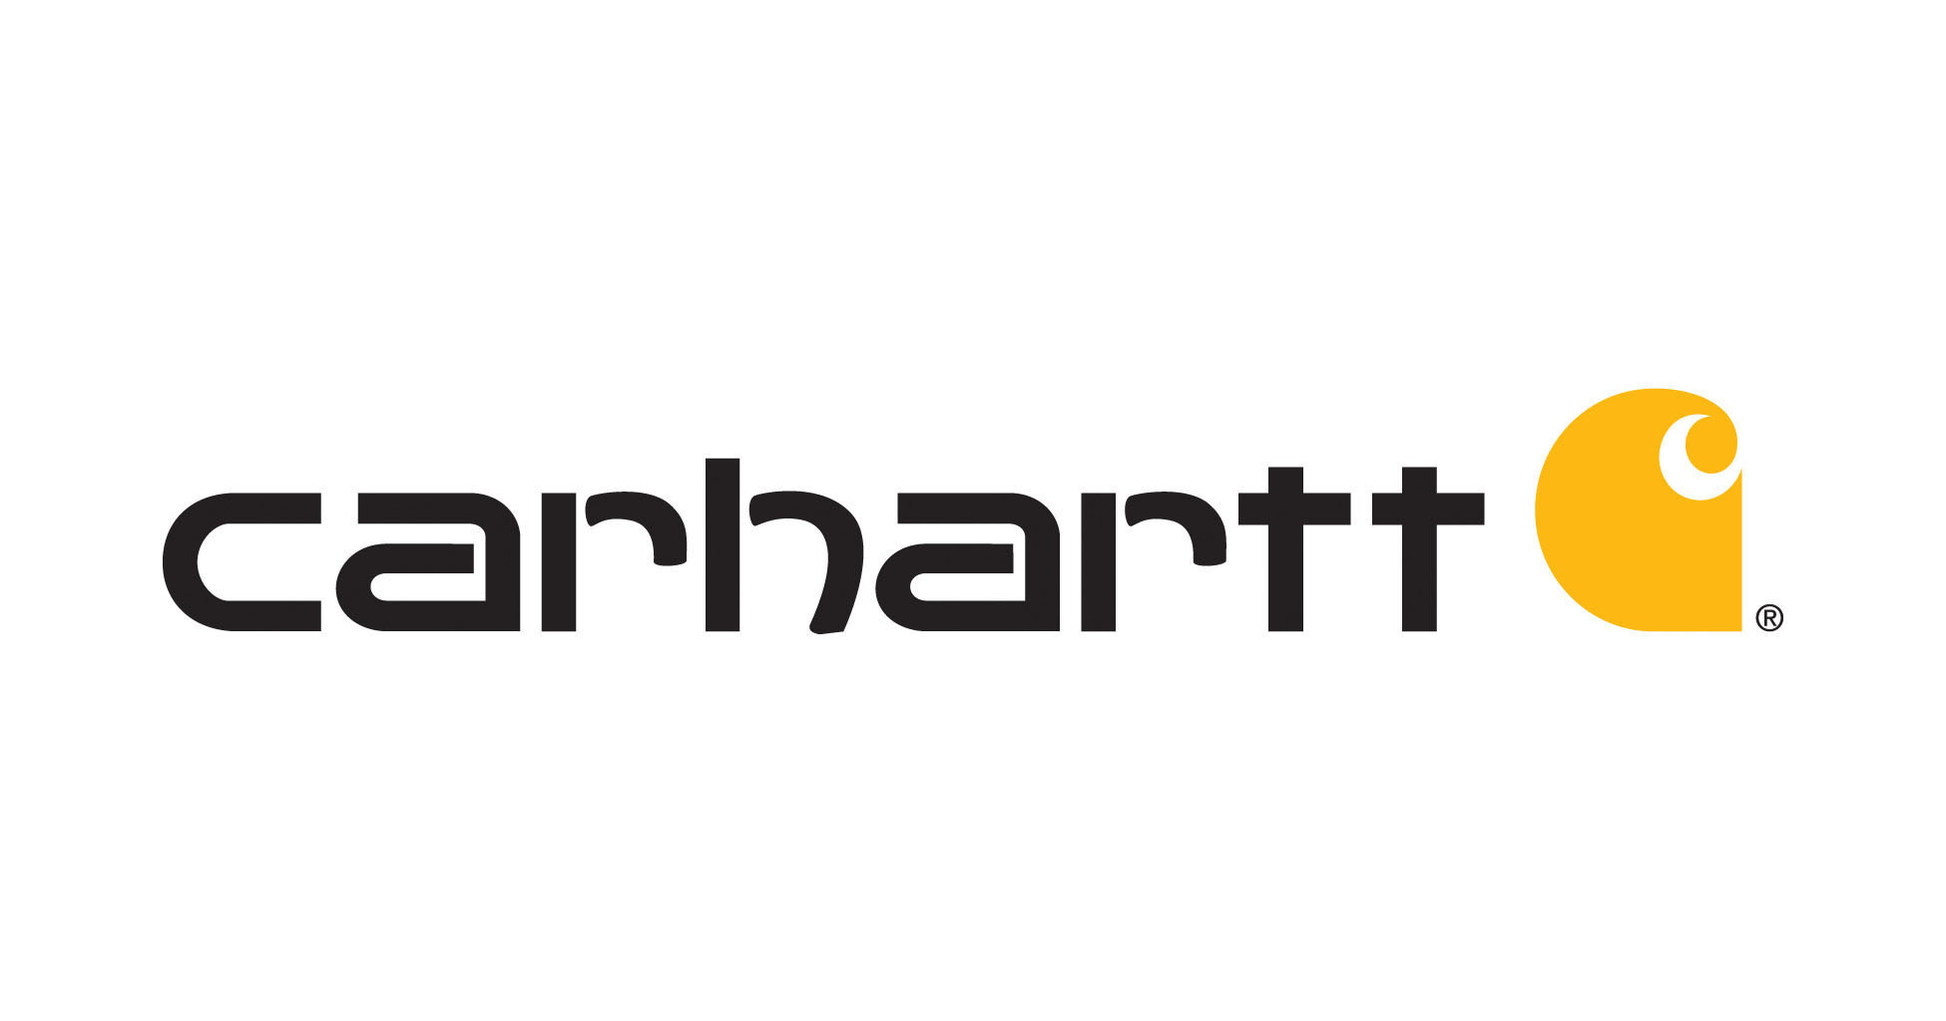 Carhartt launches leggings for women - Electrical Contracting News